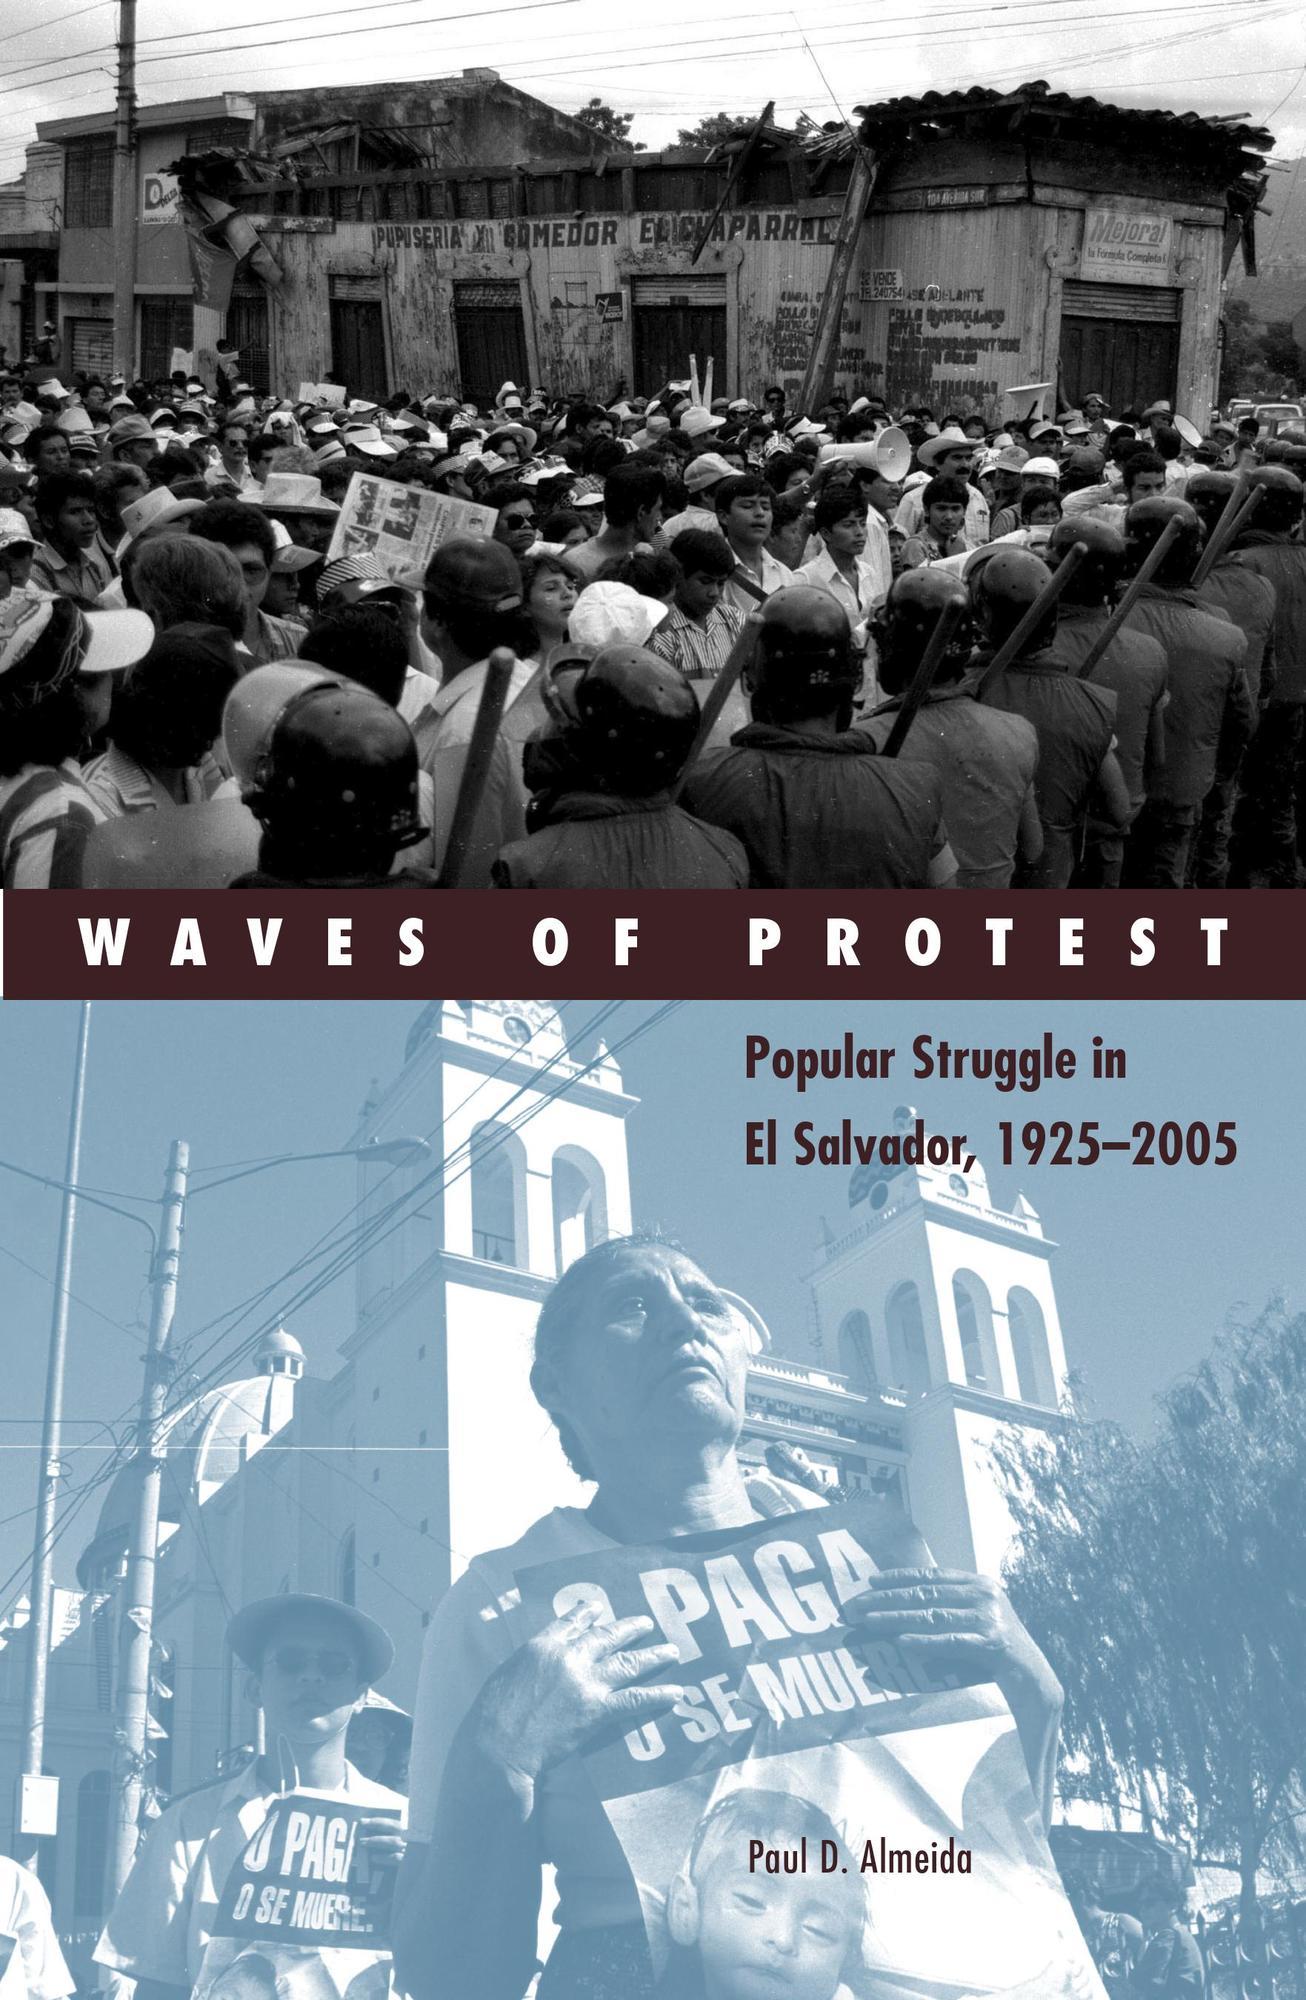 Waves of Protest book cover